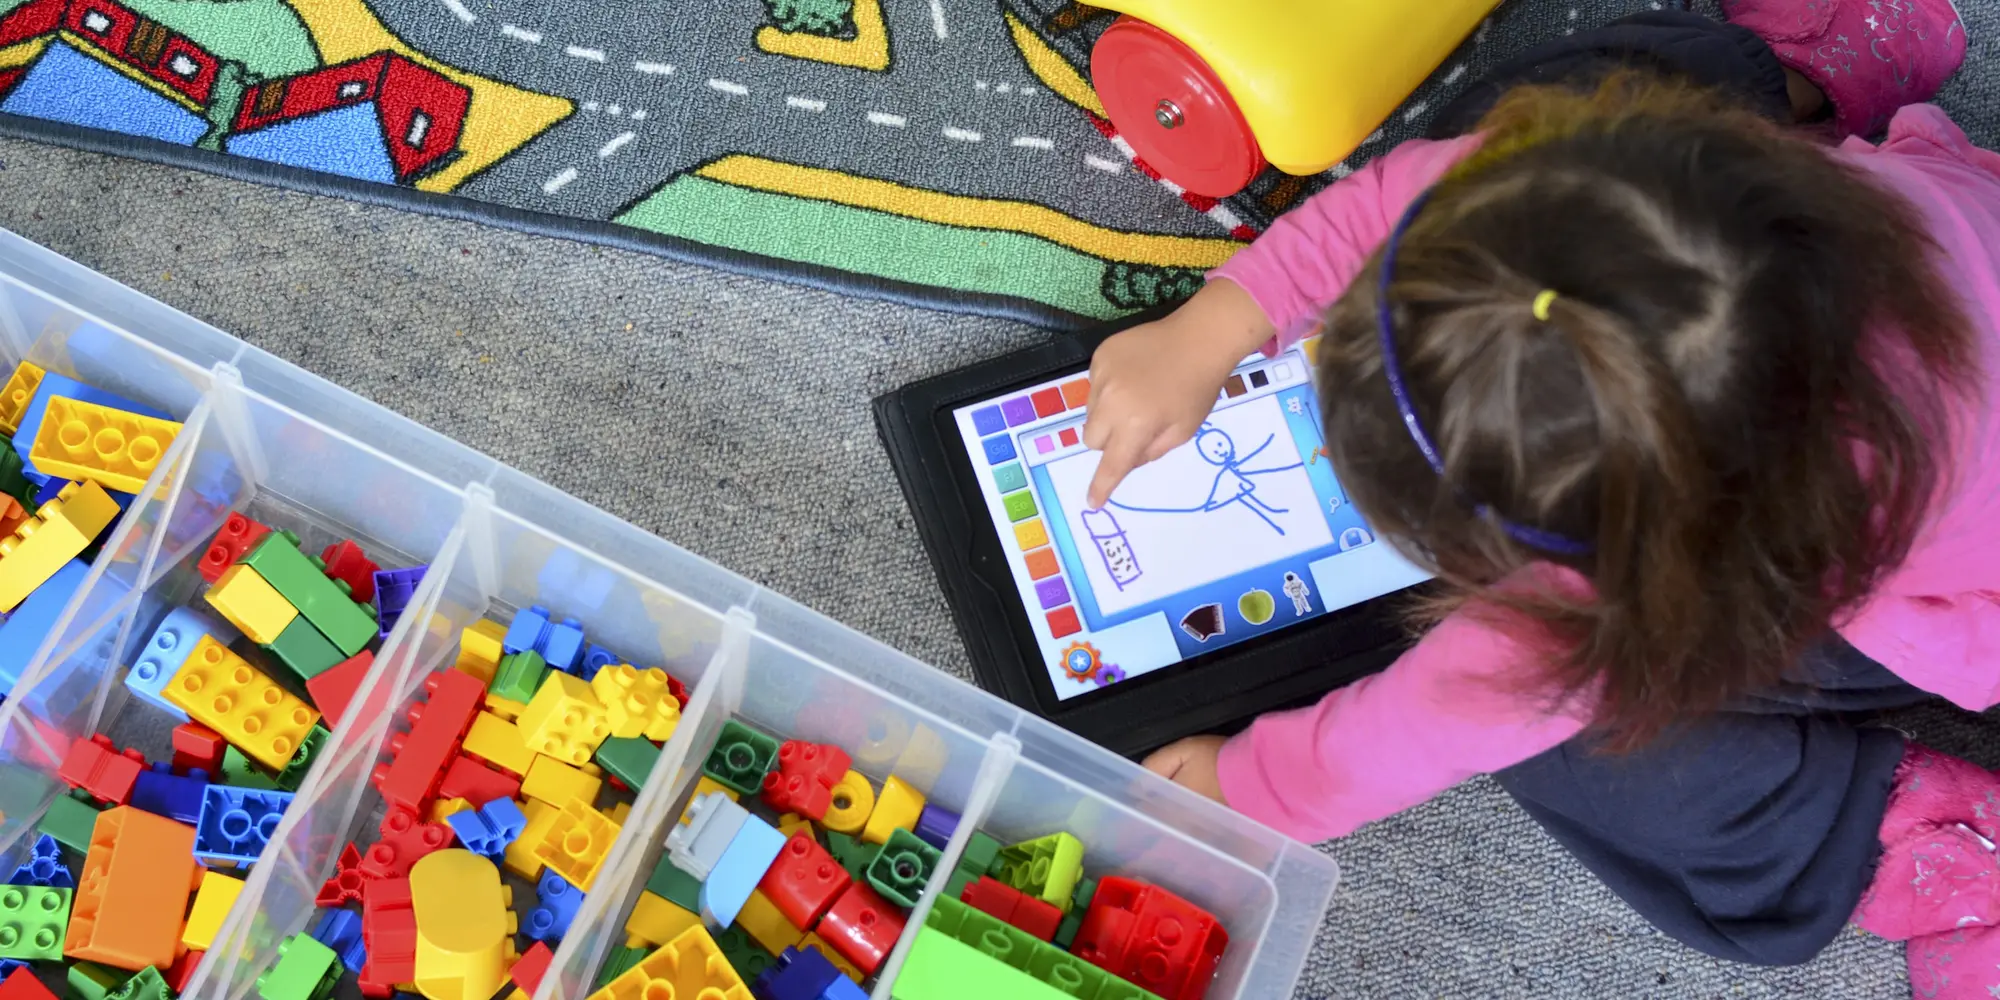 a student sits on the floor and plays with a drawing application on a tablet next to bins of colorful blocks